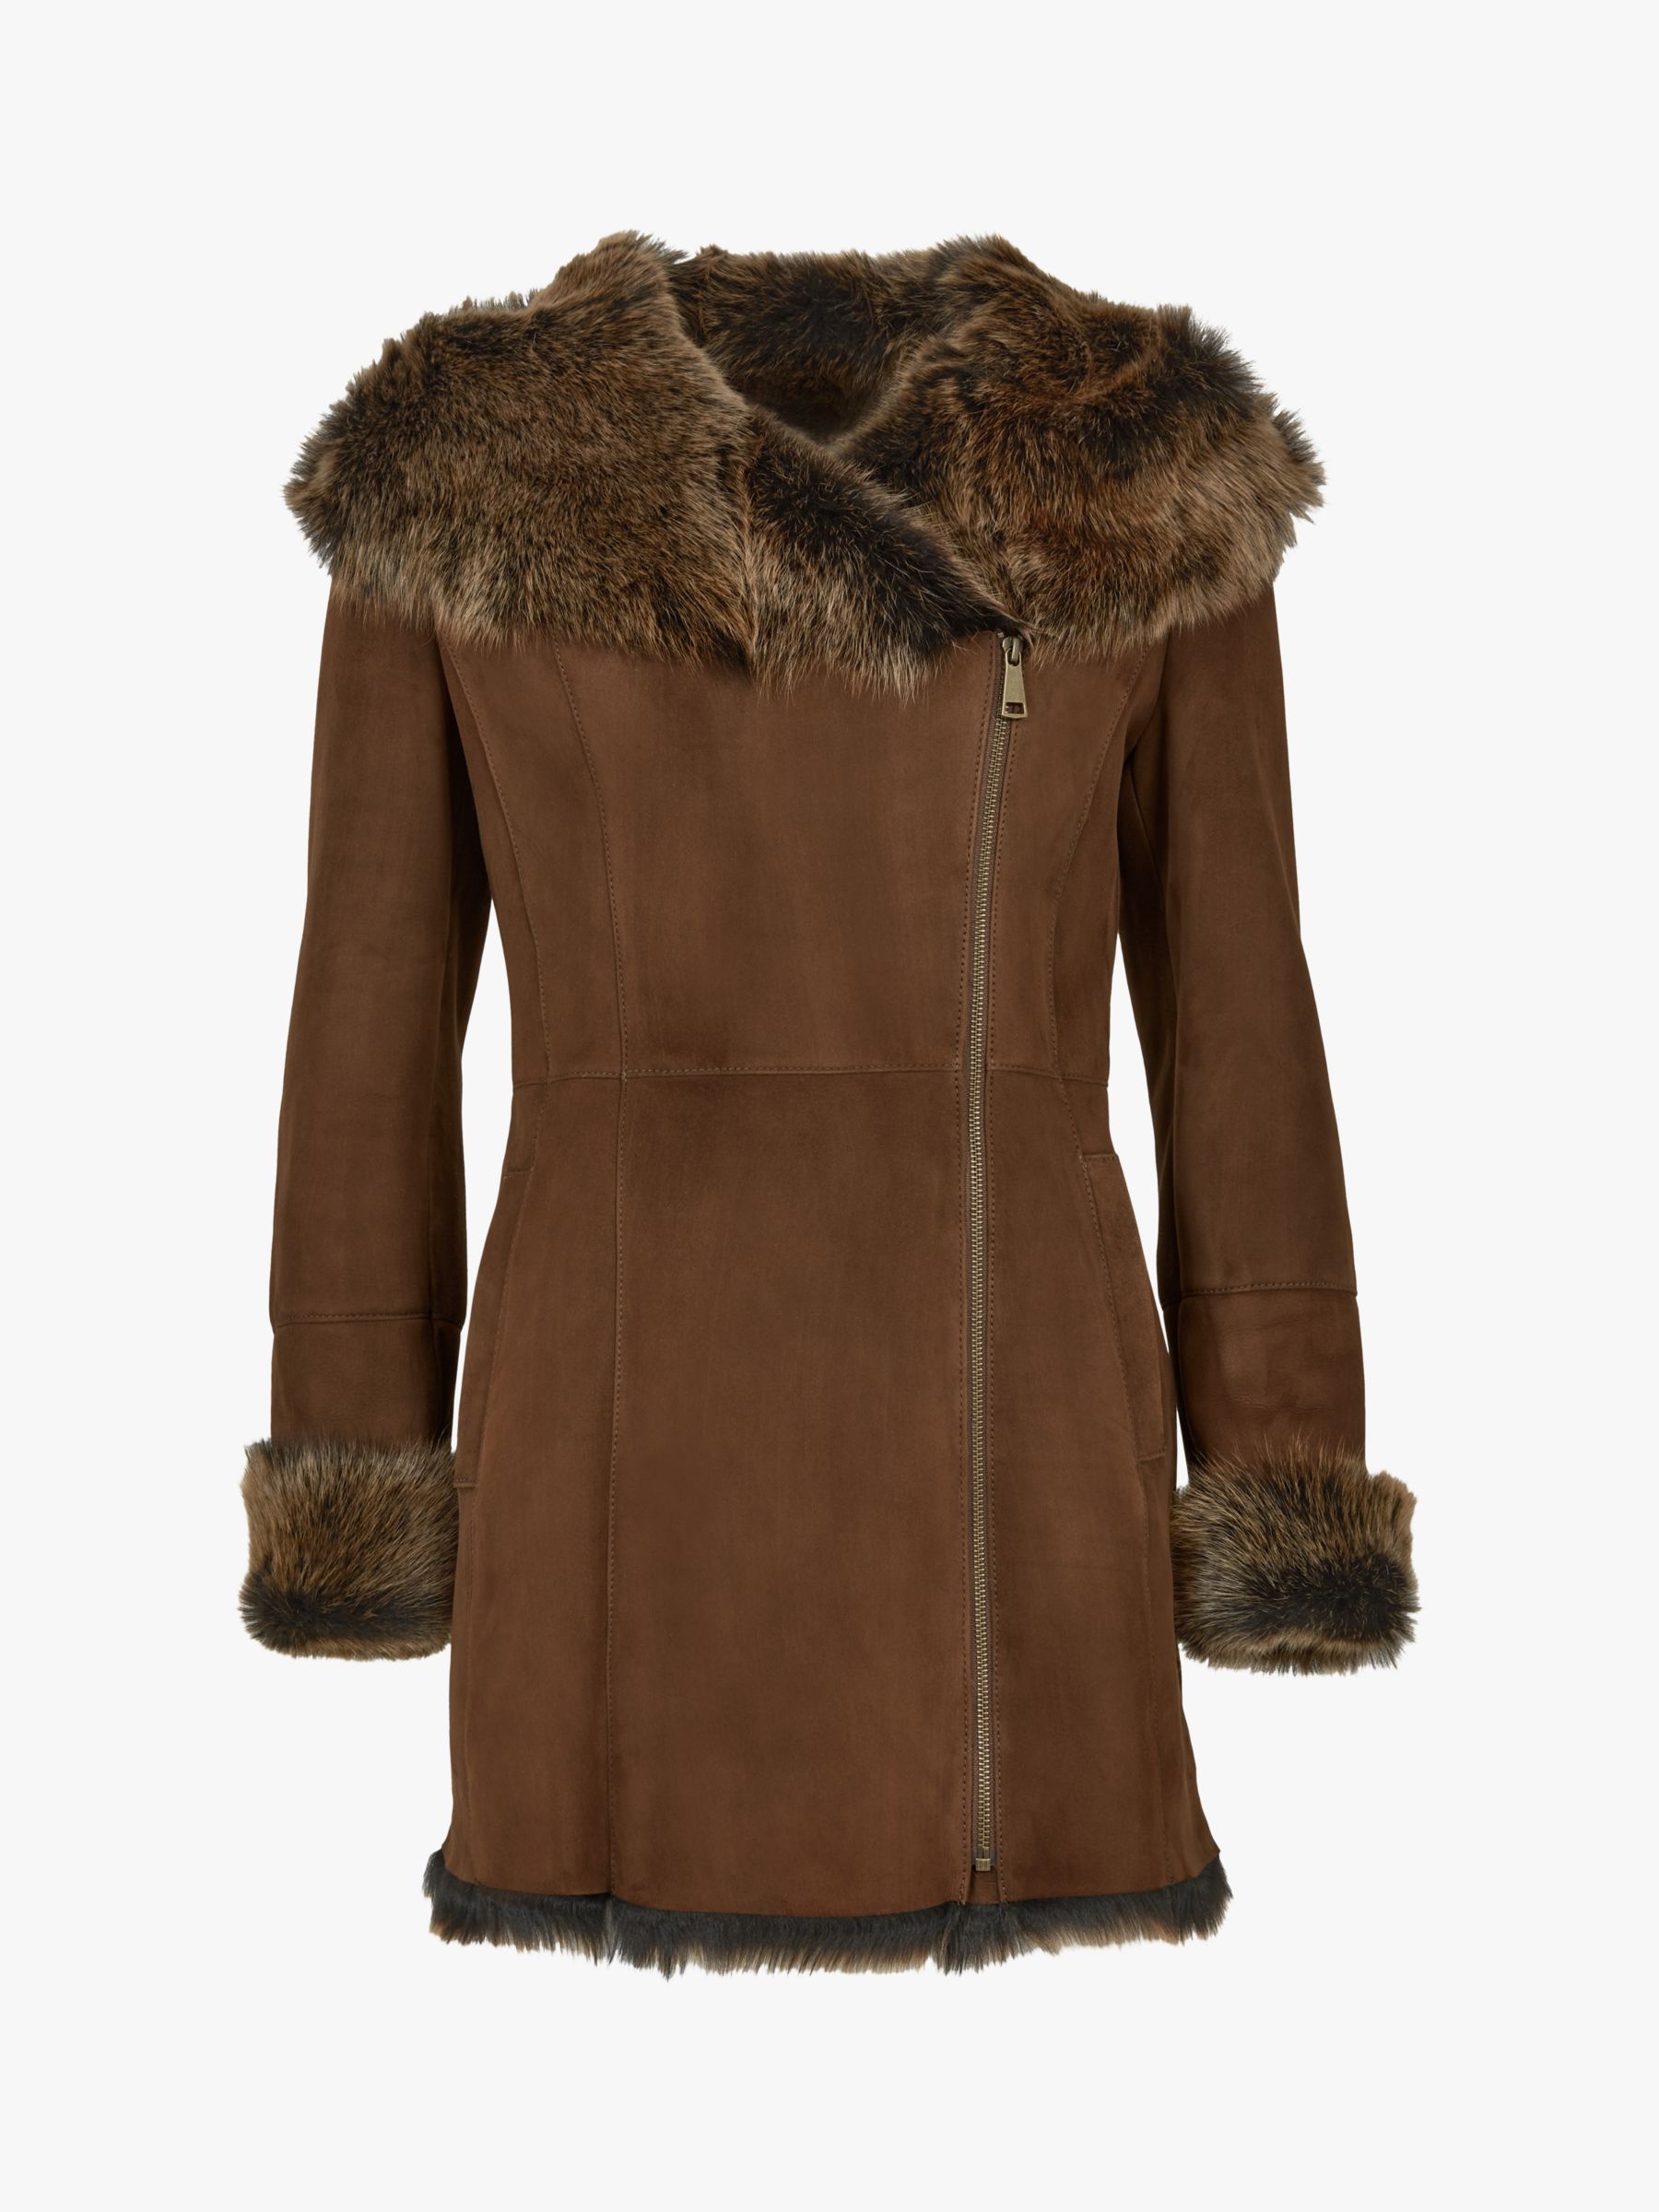 Celtic And Co Toscana Hood Sheepskin Coat Rust At John Lewis And Partners